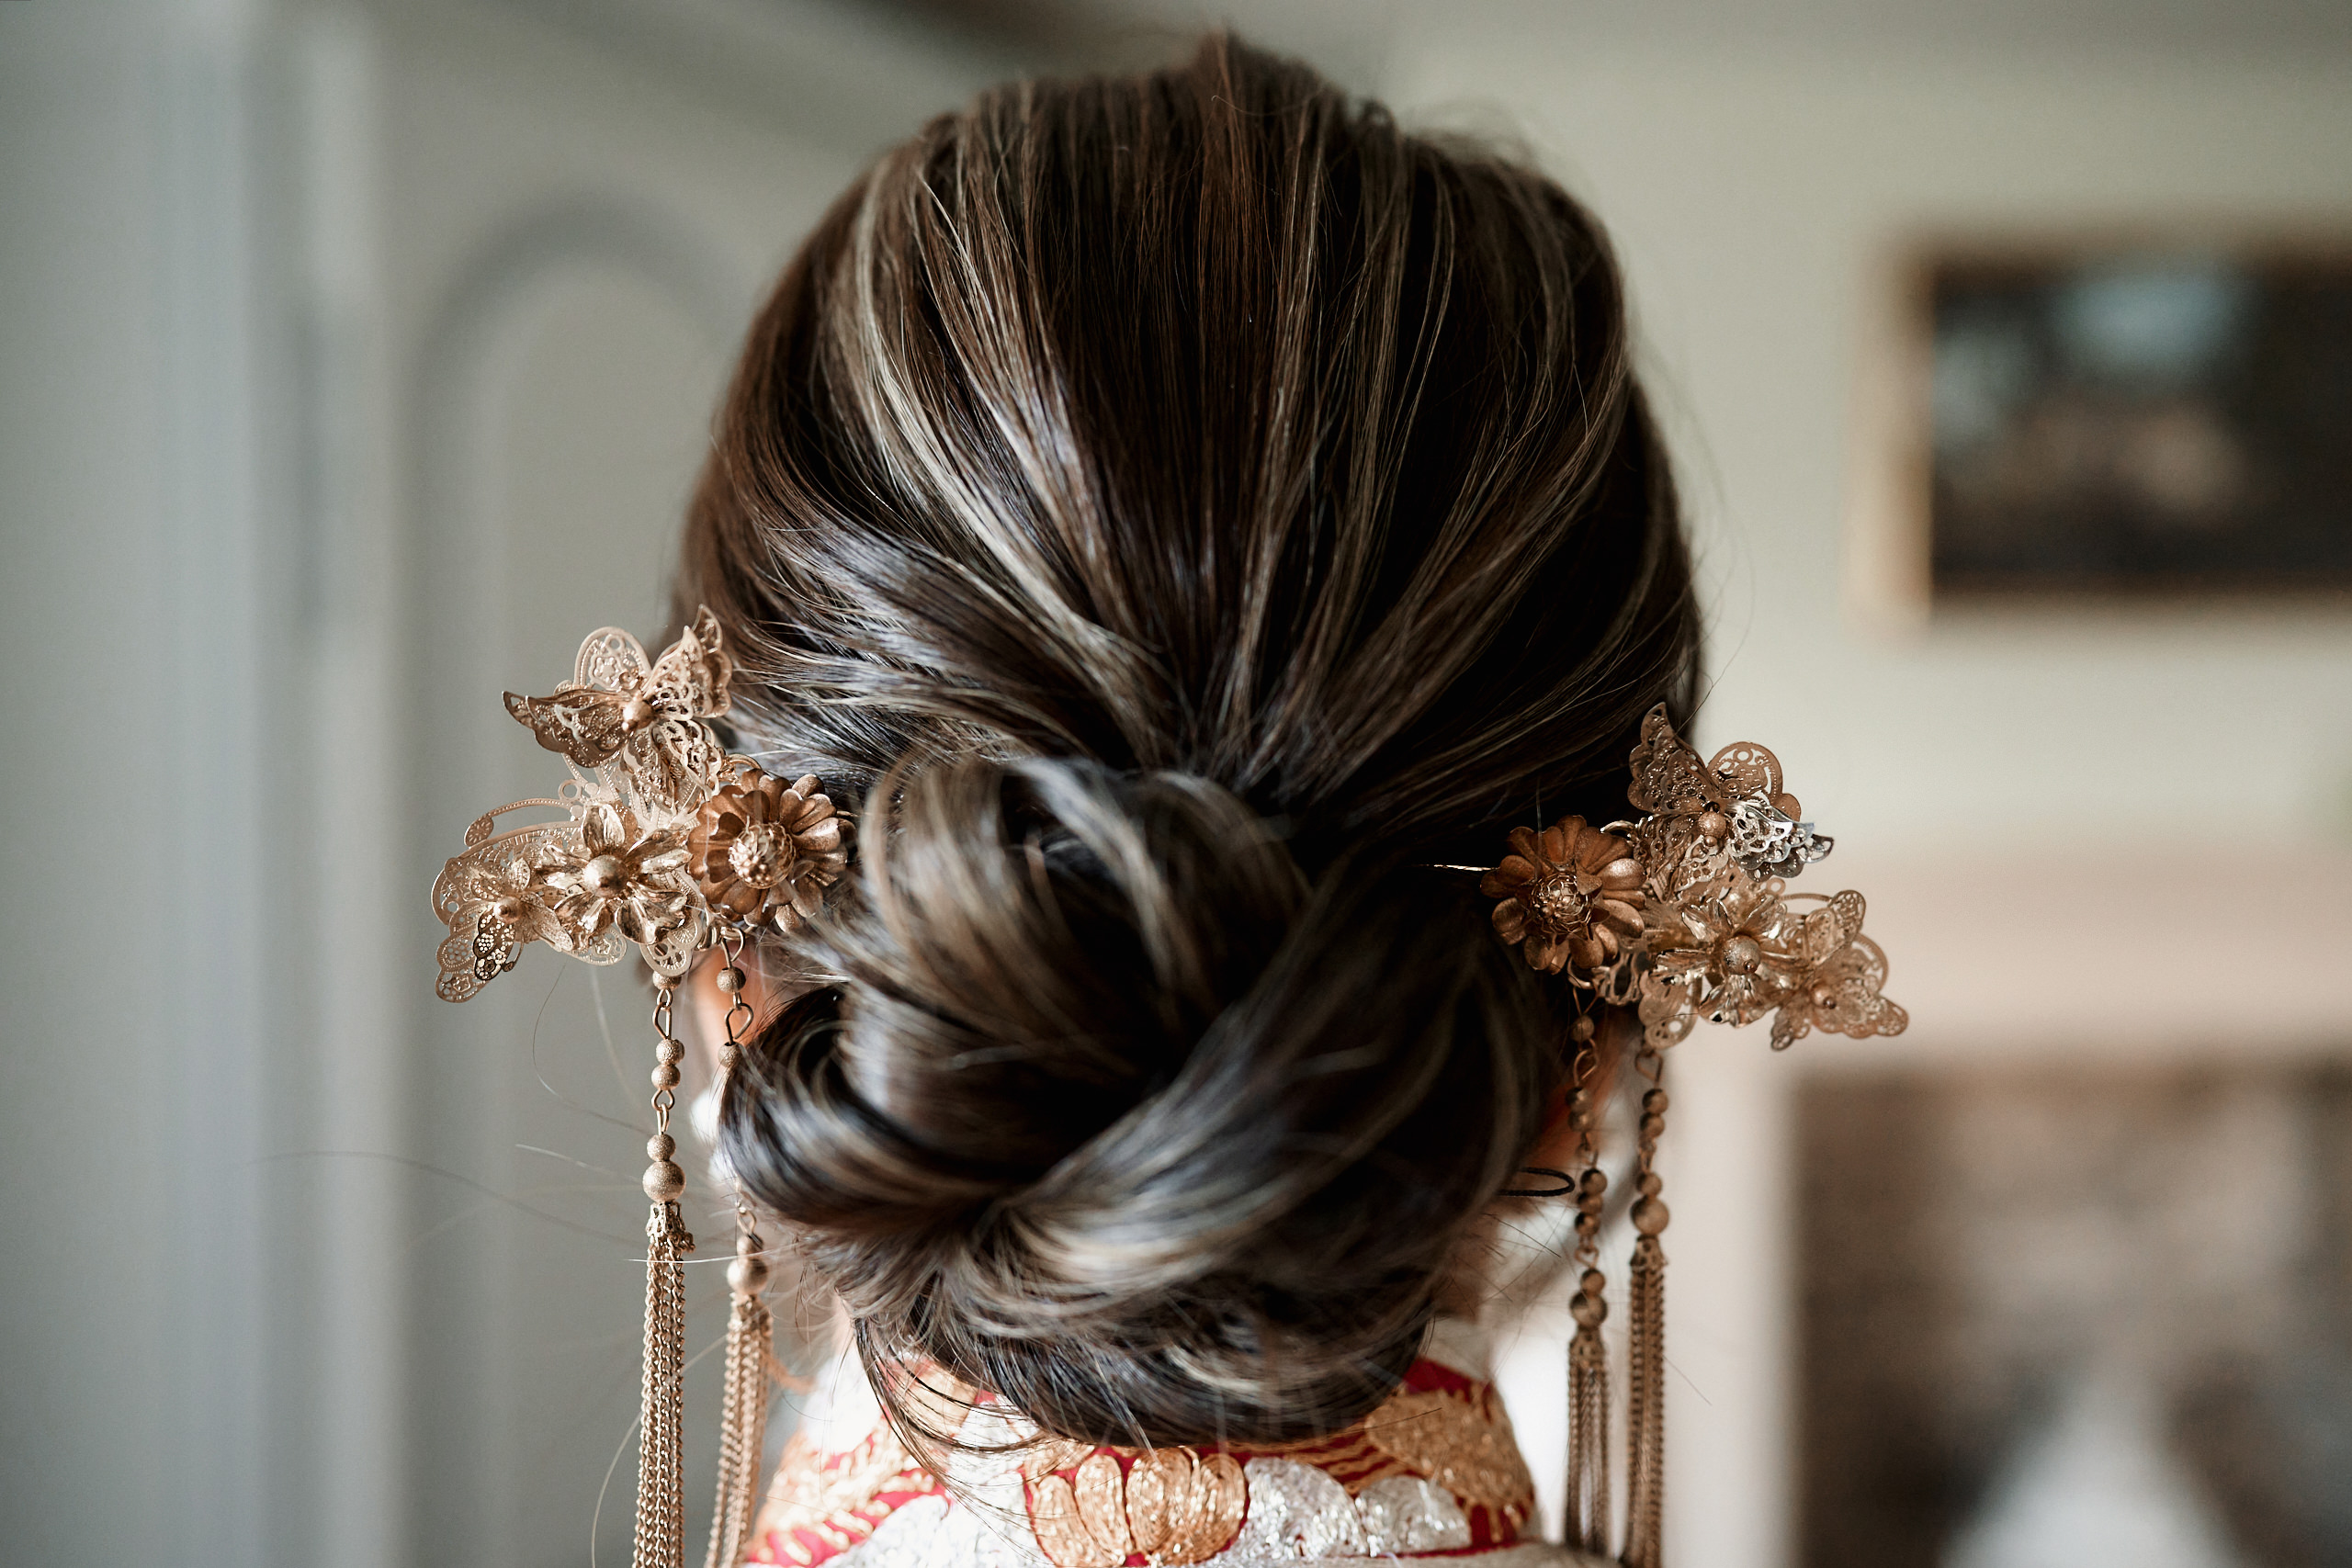 A woman's hair from behind, wearing an Asian accessory.